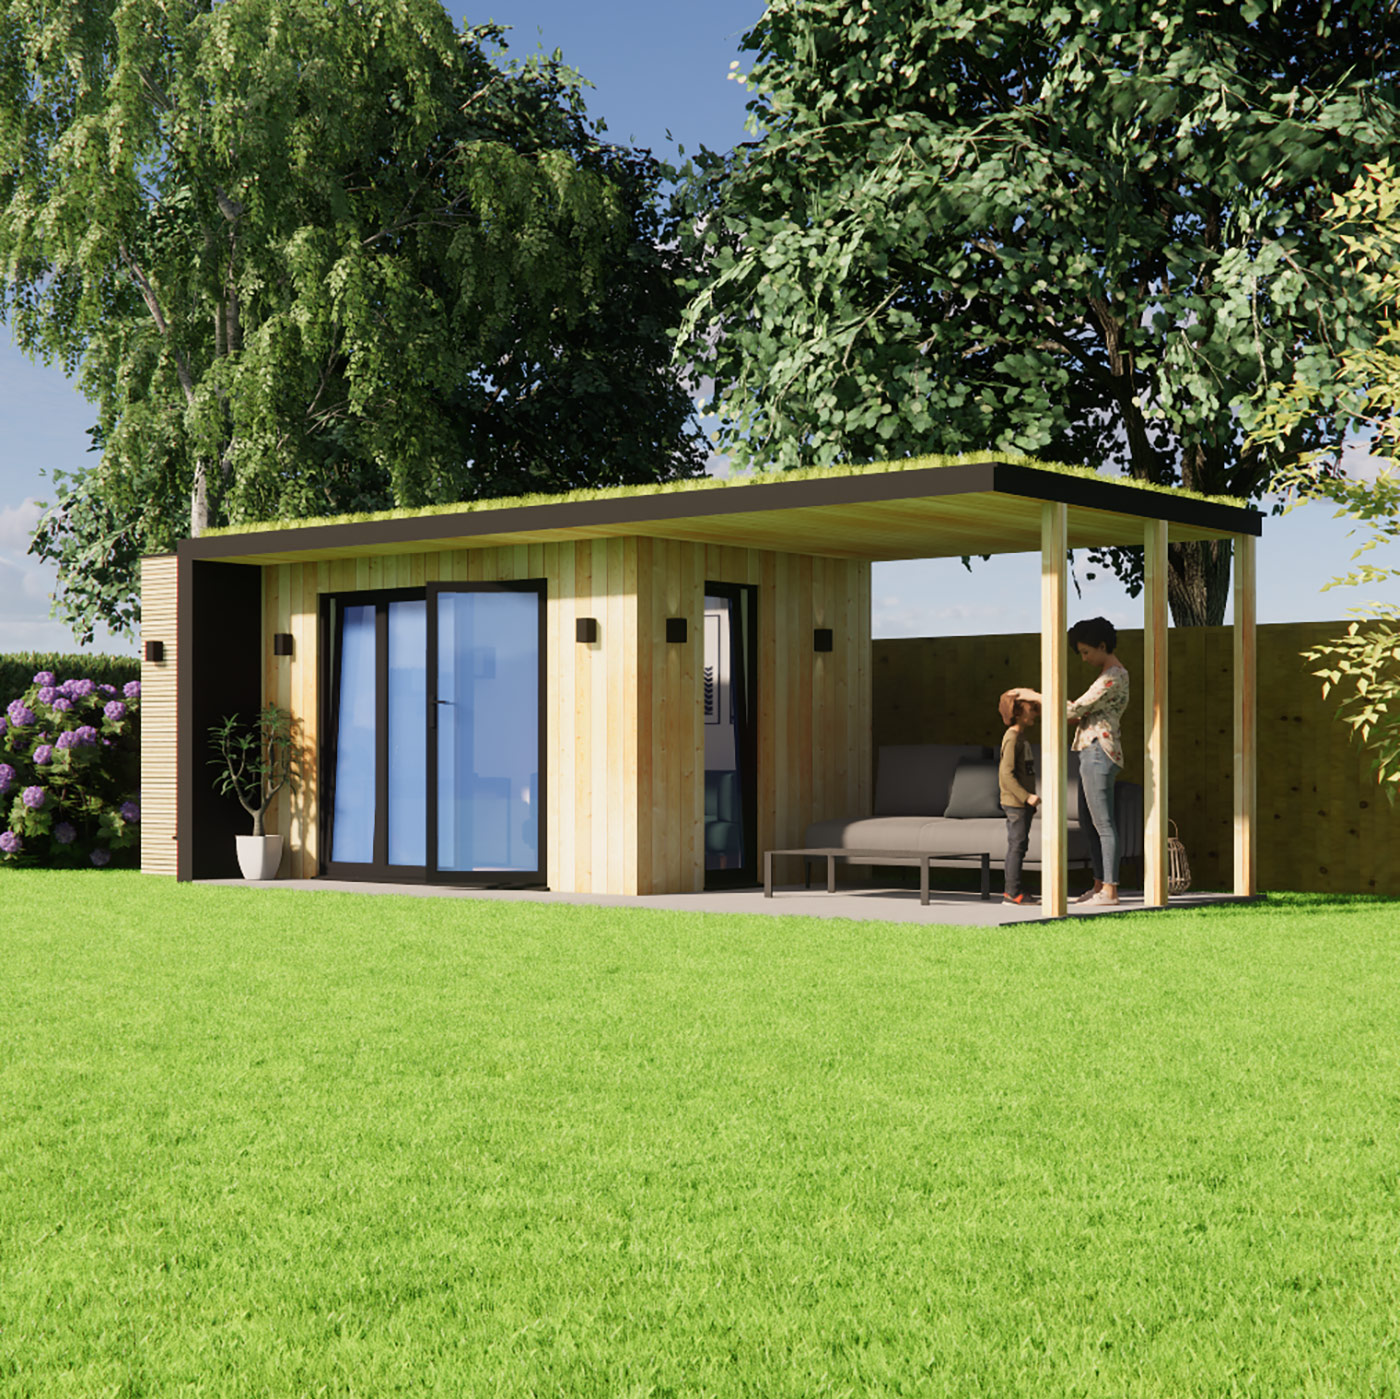 visualisation of 2.6m by 5.0m family garden room